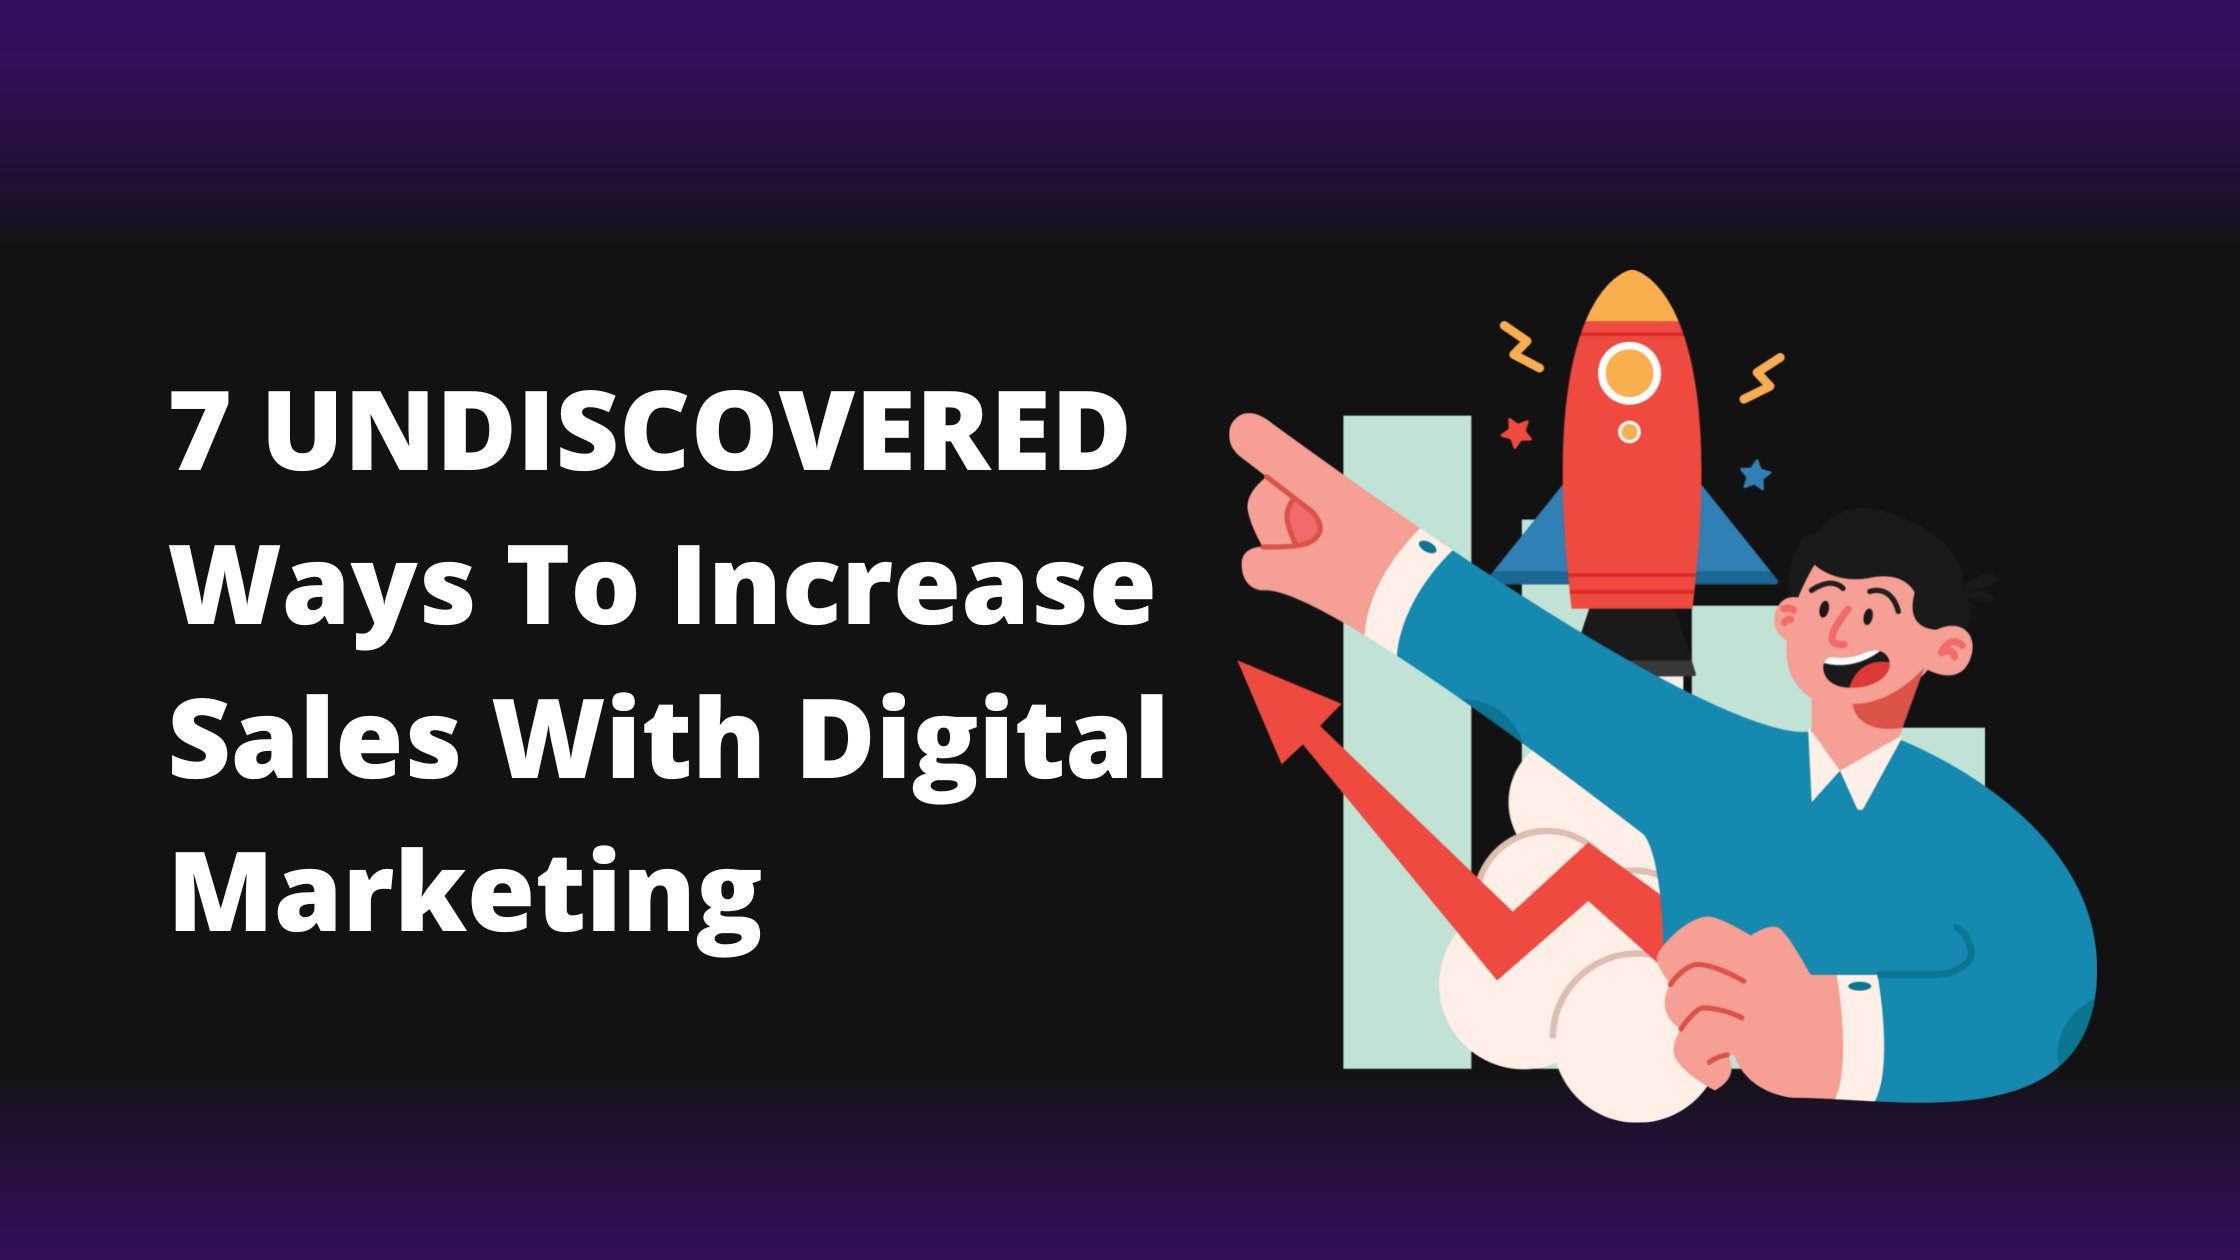 7 Undiscovered Ways To Increase Sales With Digital Marketing